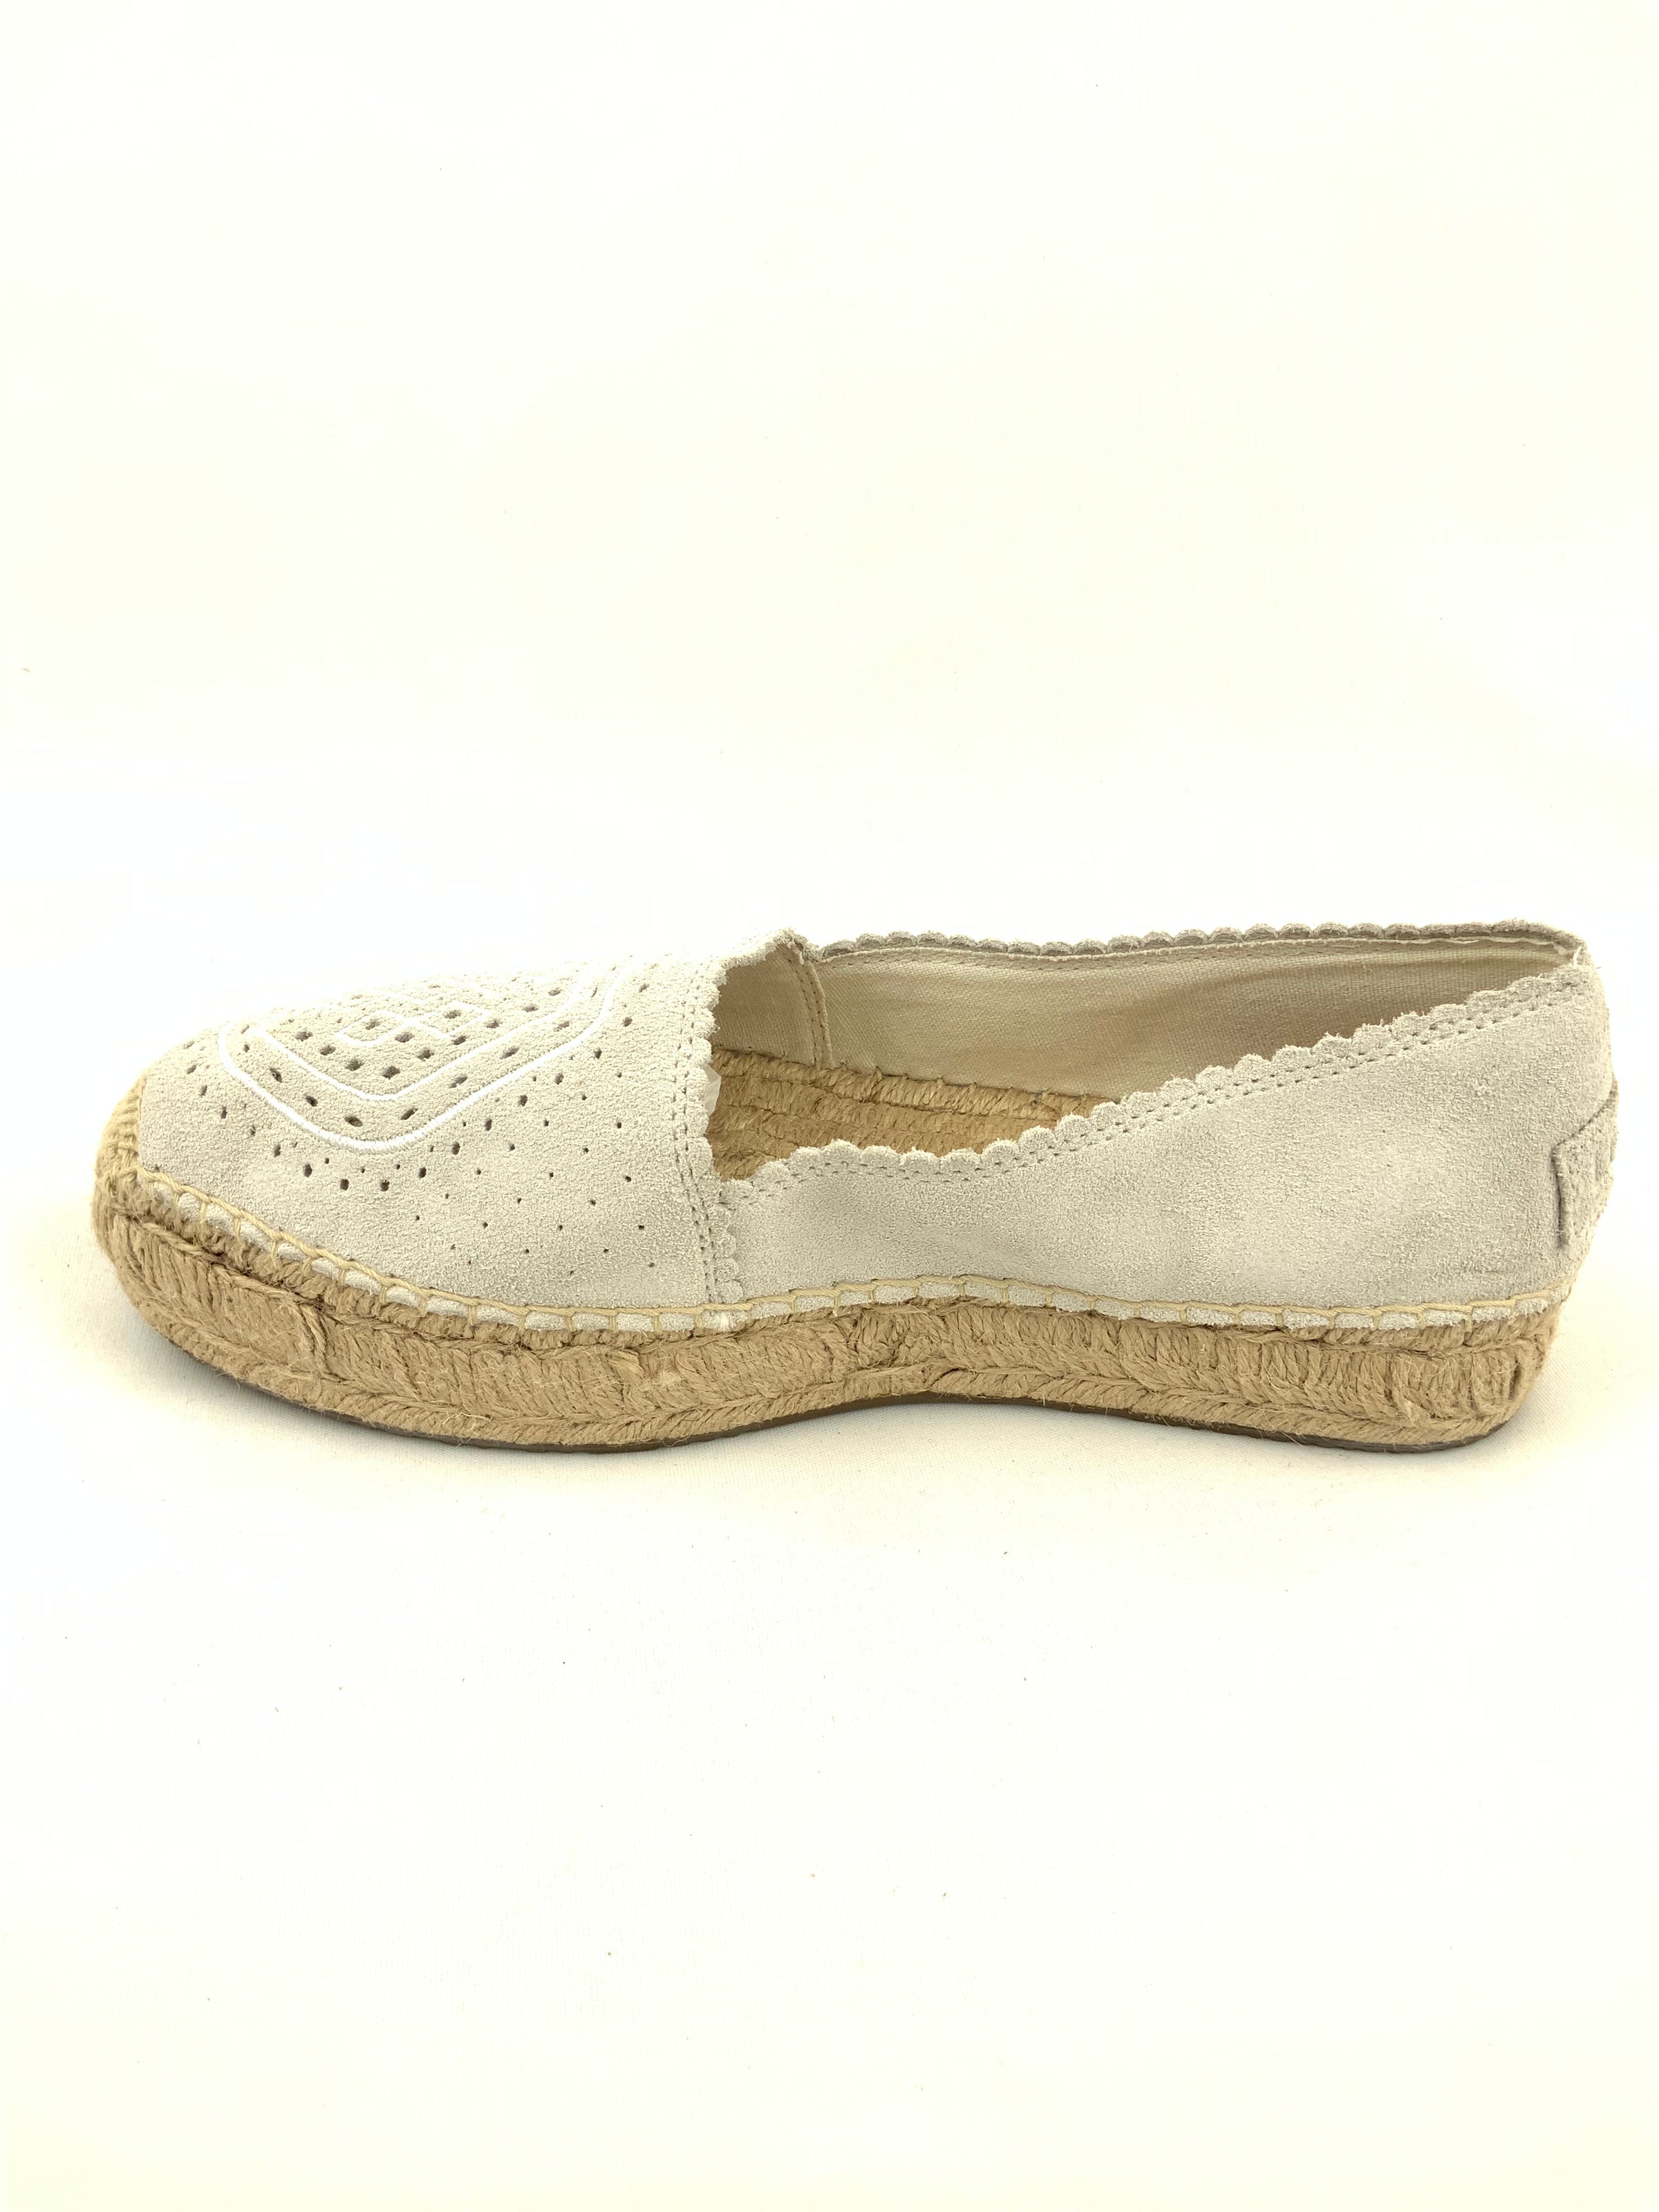 Uggs Espadrille Shoes Size 7.5